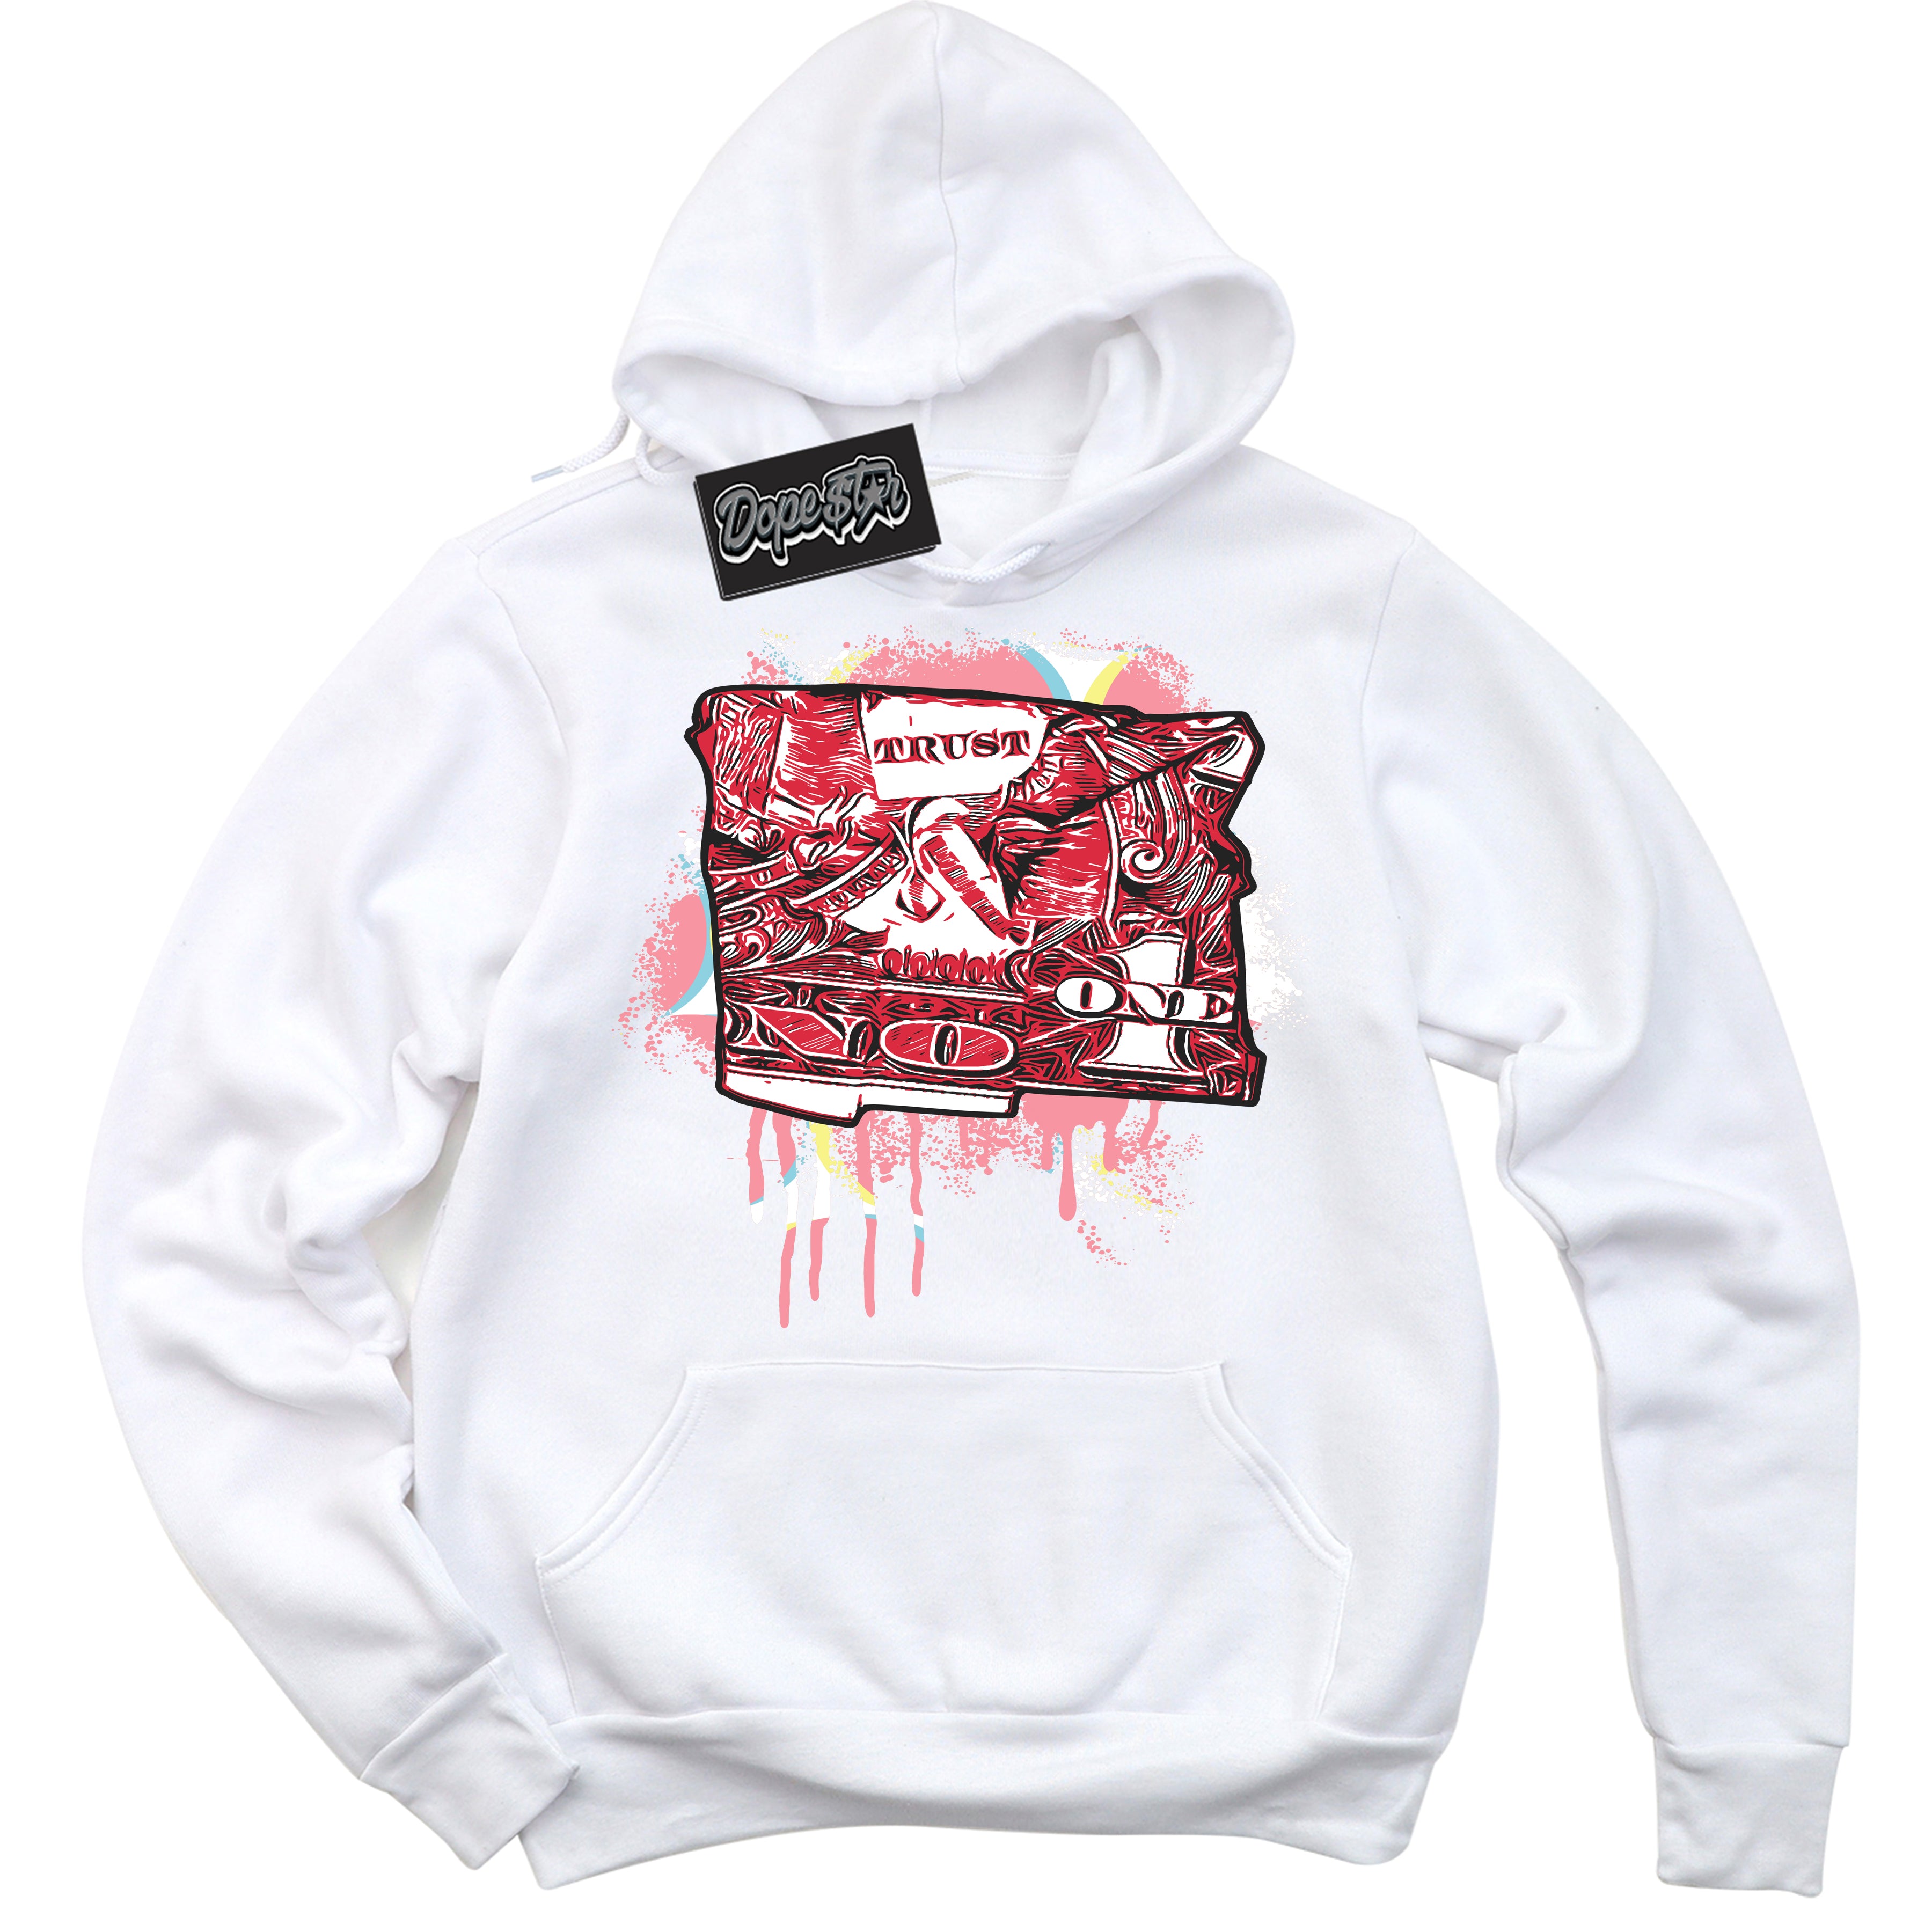 Cool White Graphic DopeStar Hoodie with “ Trust No One Dollar “ print, that perfectly matches Spider-Verse 1s sneakers